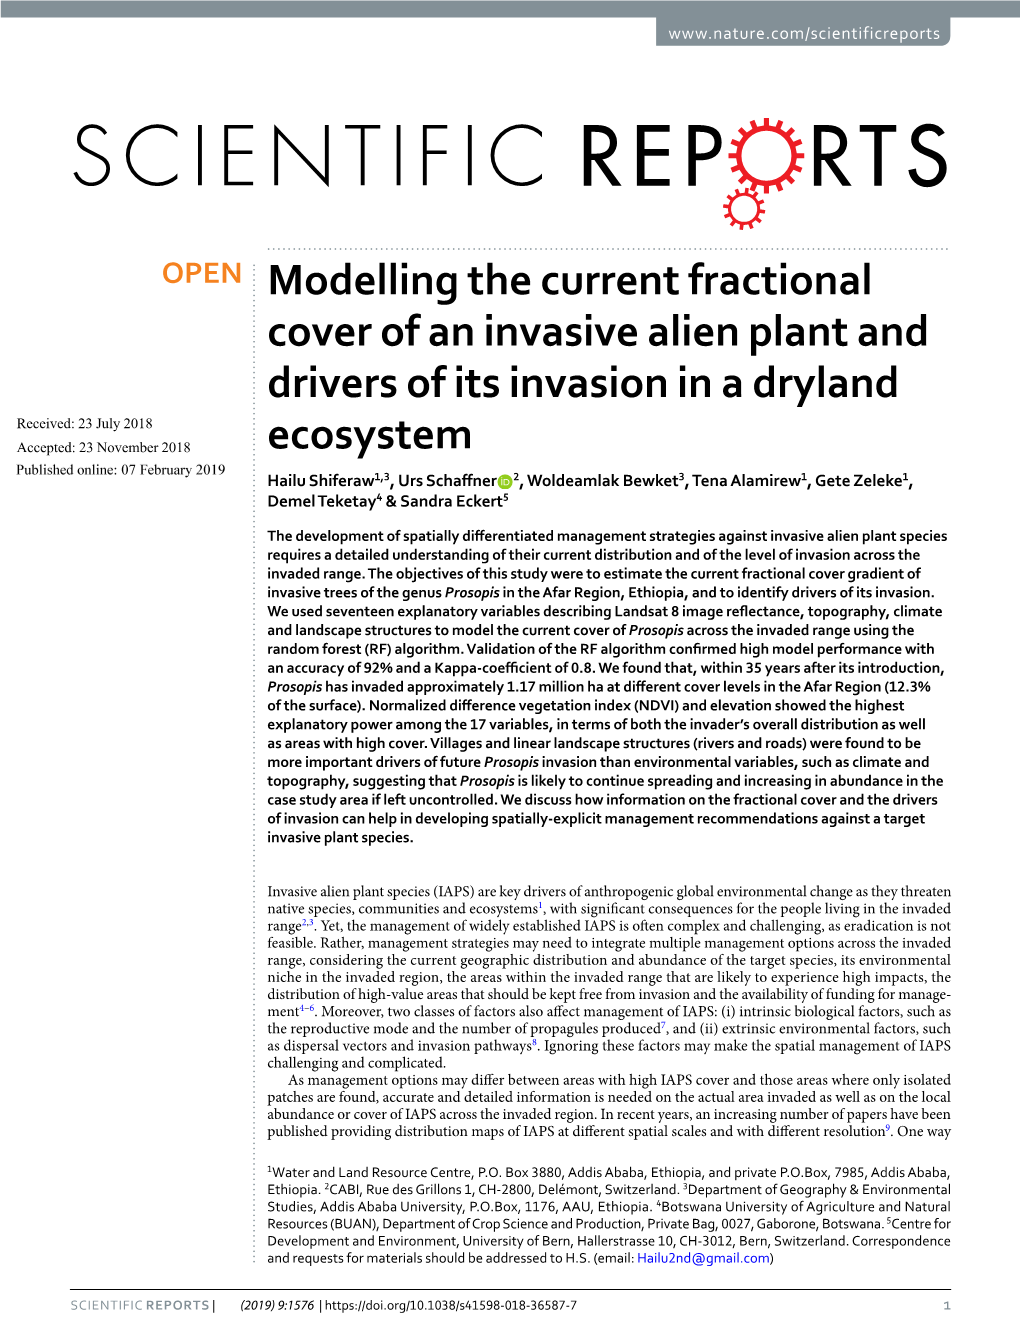 Modelling the Current Fractional Cover of an Invasive Alien Plant and Drivers of Its Invasion in a Dryland Ecosystem